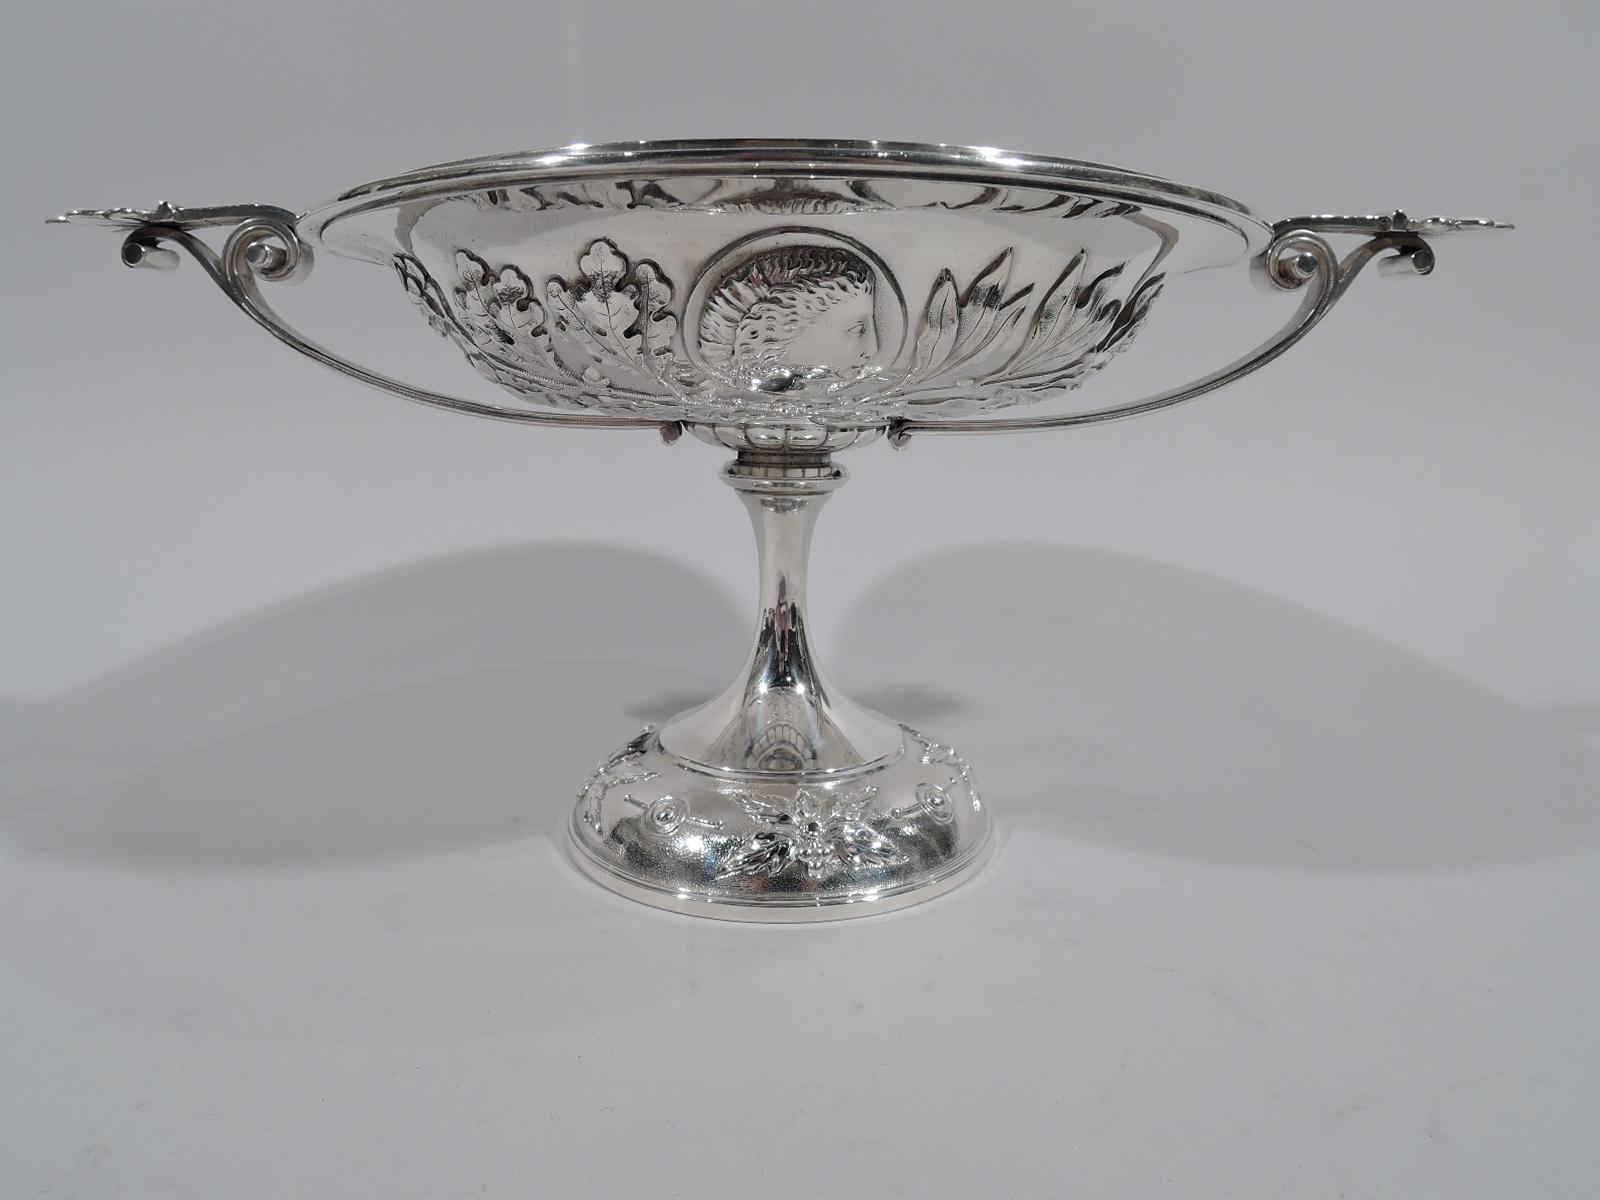 Greek Revival sterling silver footed bowl. Made by Grosjean & Woodward for Tiffany & Co. at 550 Broadway in New York. Bowl wide and shallow with flat fretwork rim. Ornament applied to exterior: Medallions inset with male youth heads surrounded by